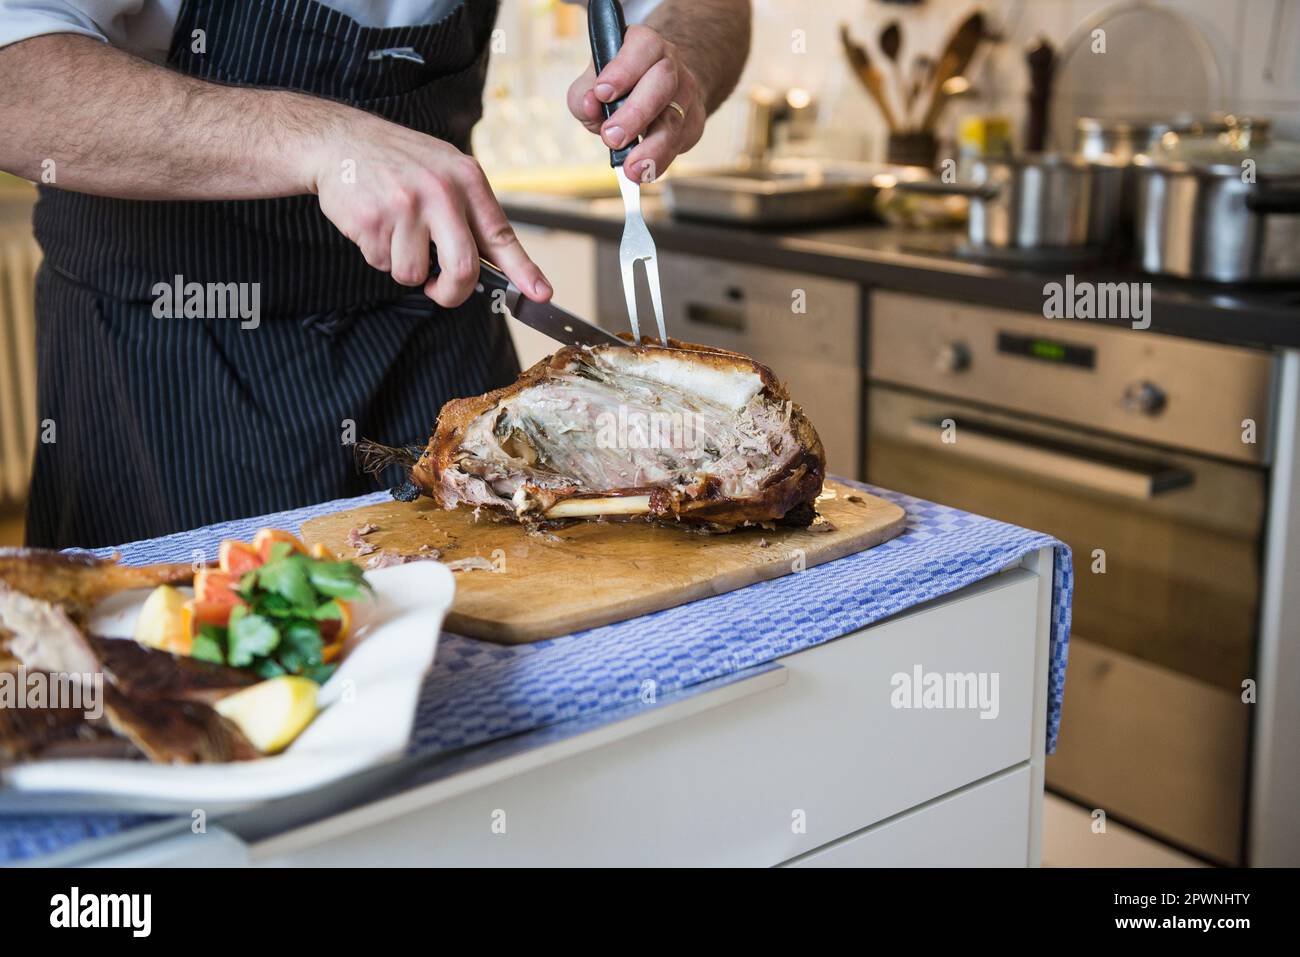 Chef carving a roasted duck Stock Photo